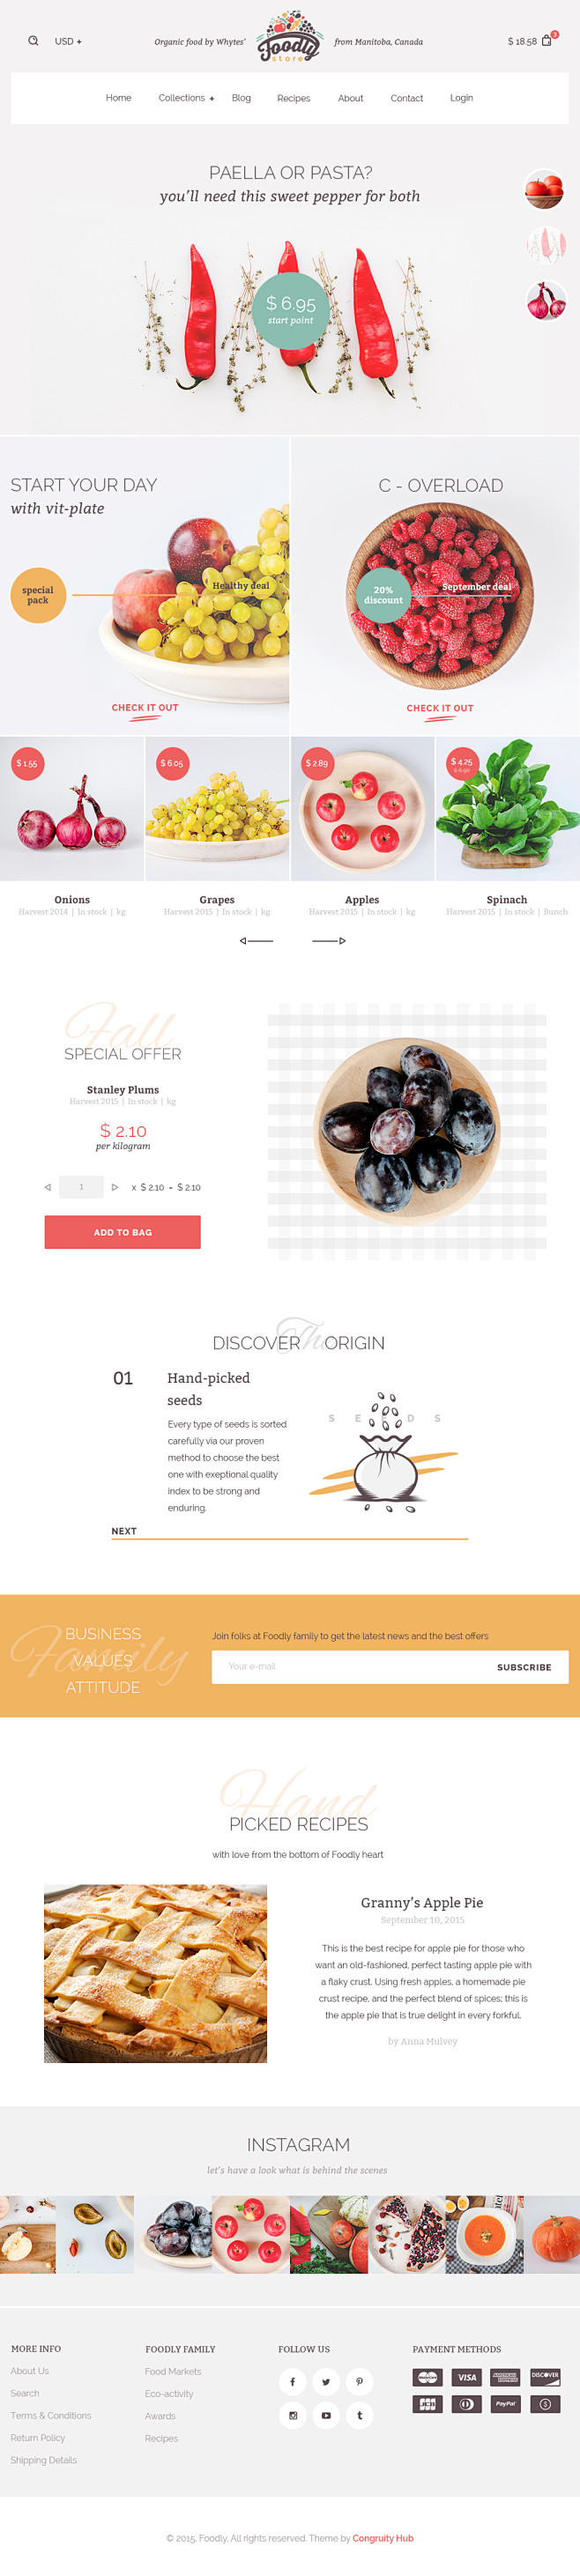 01 foodly homepage d...